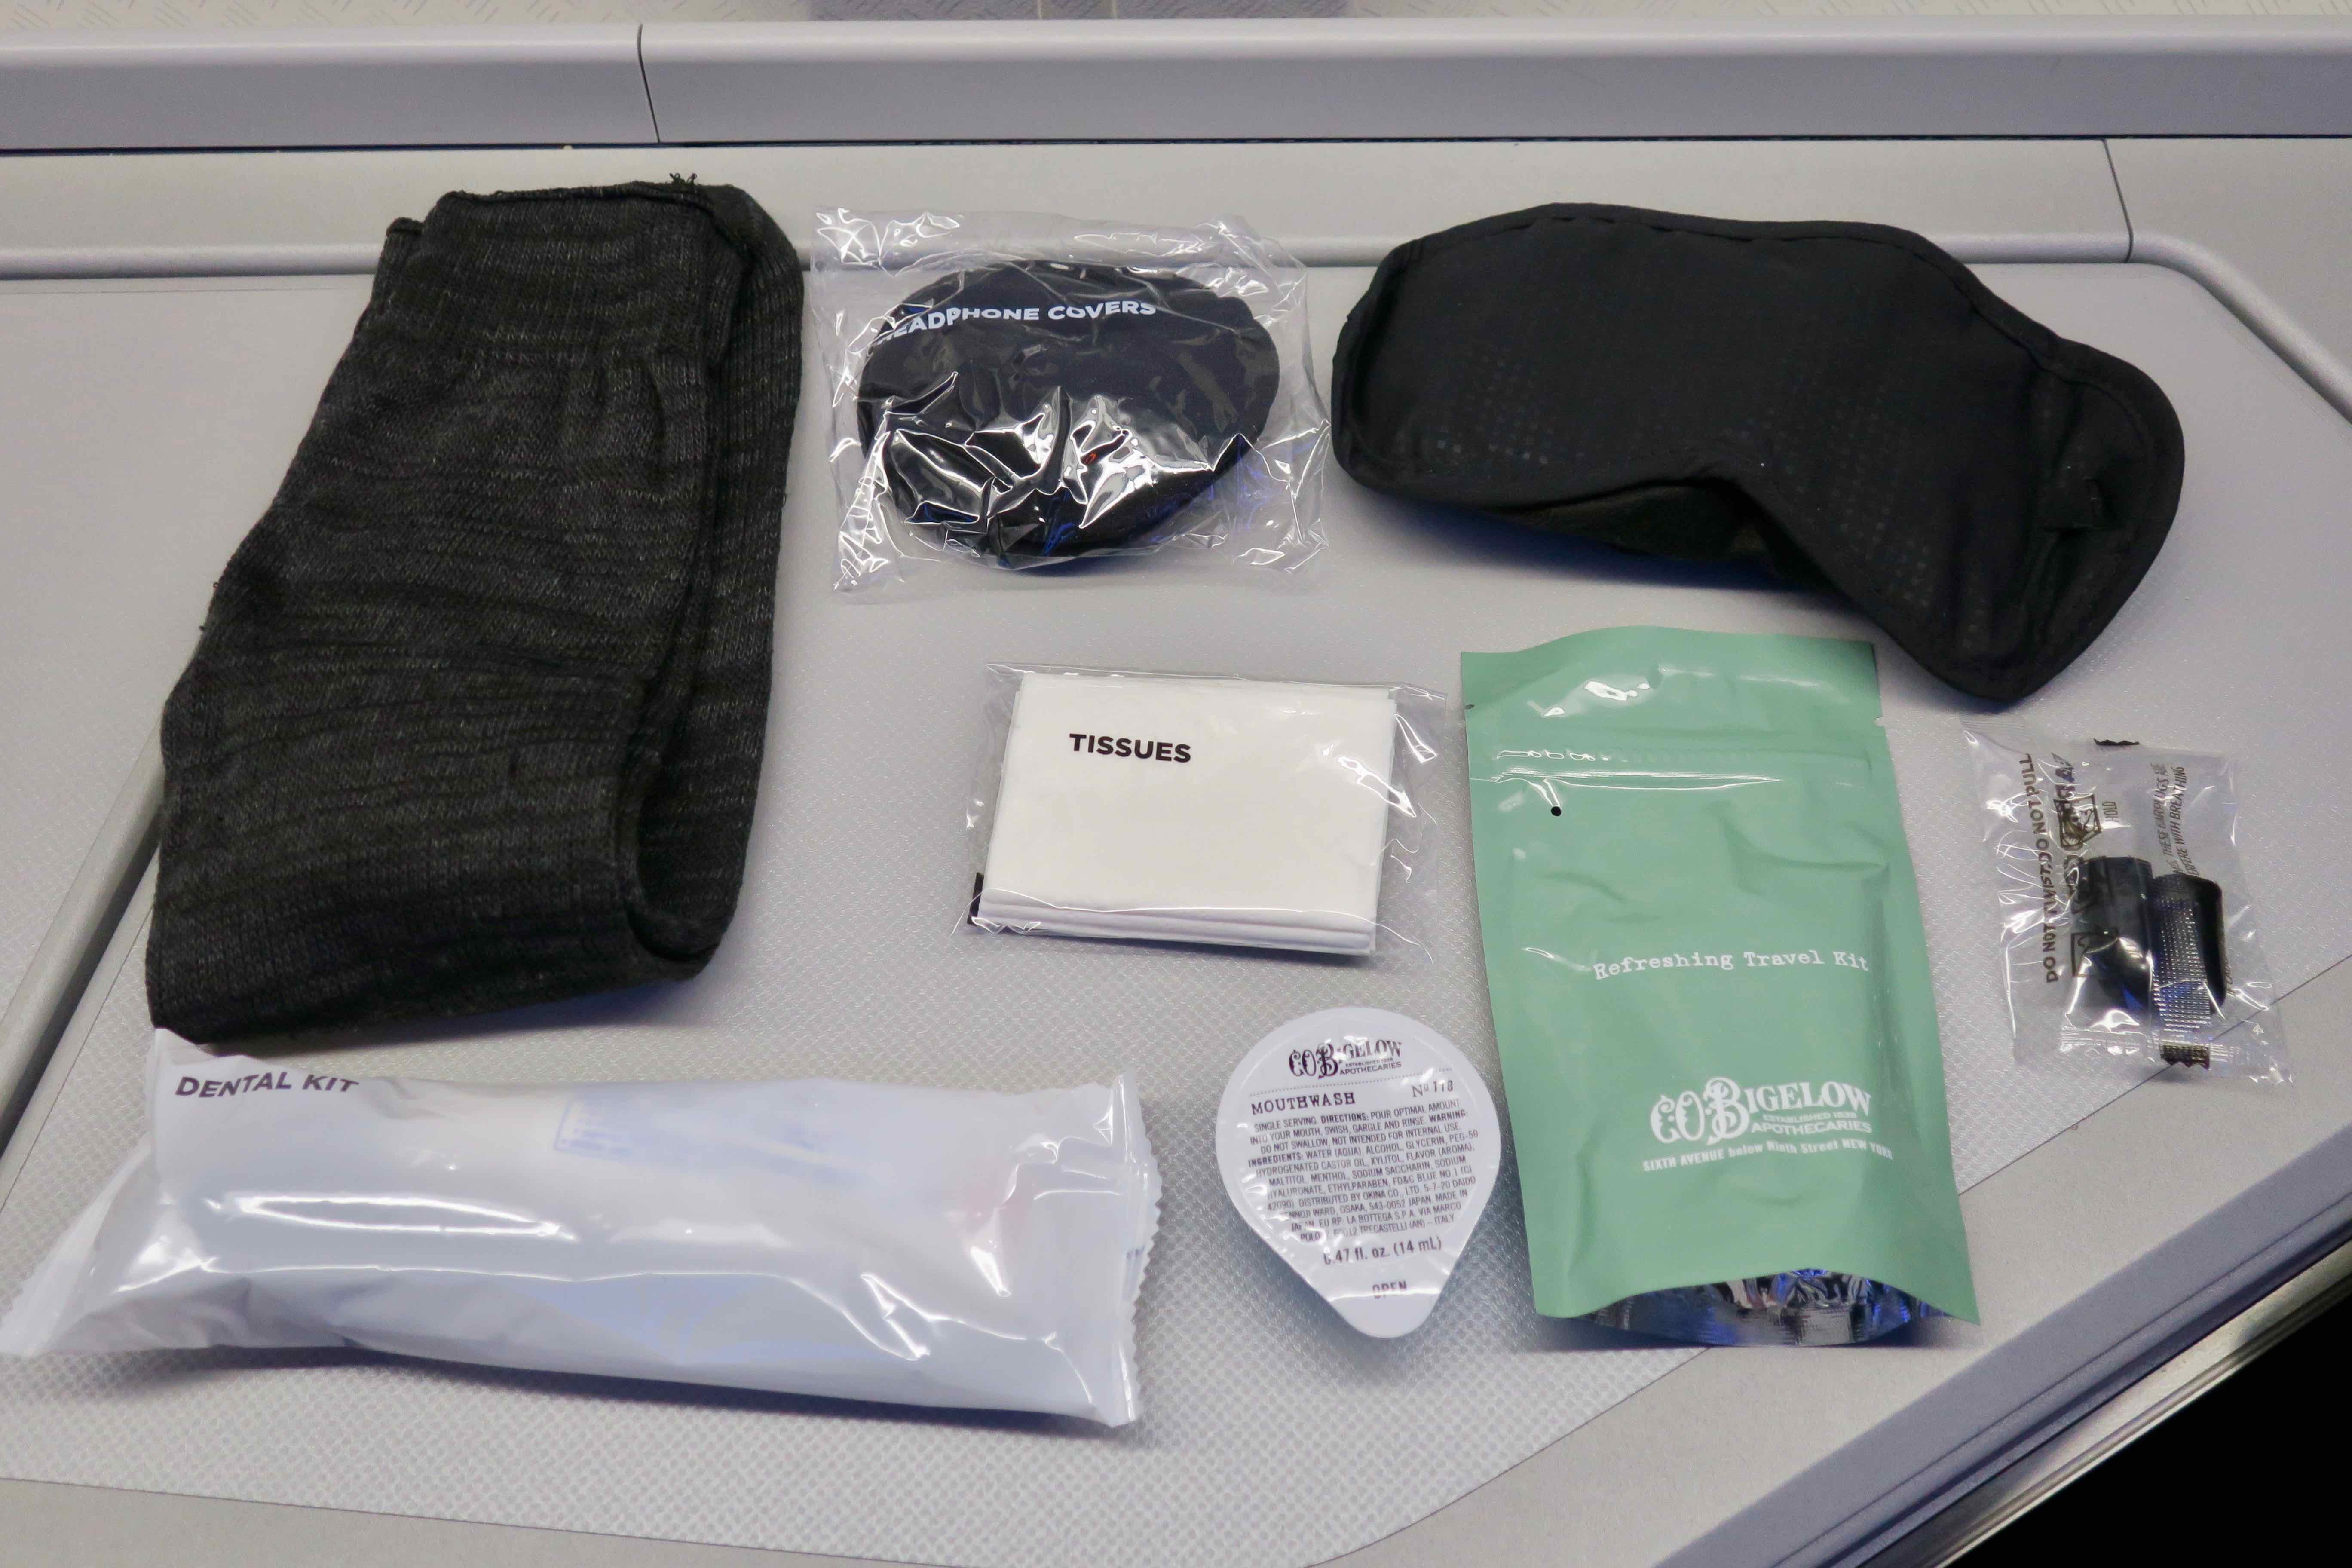 American Airlines 772 Business Class amenity kit